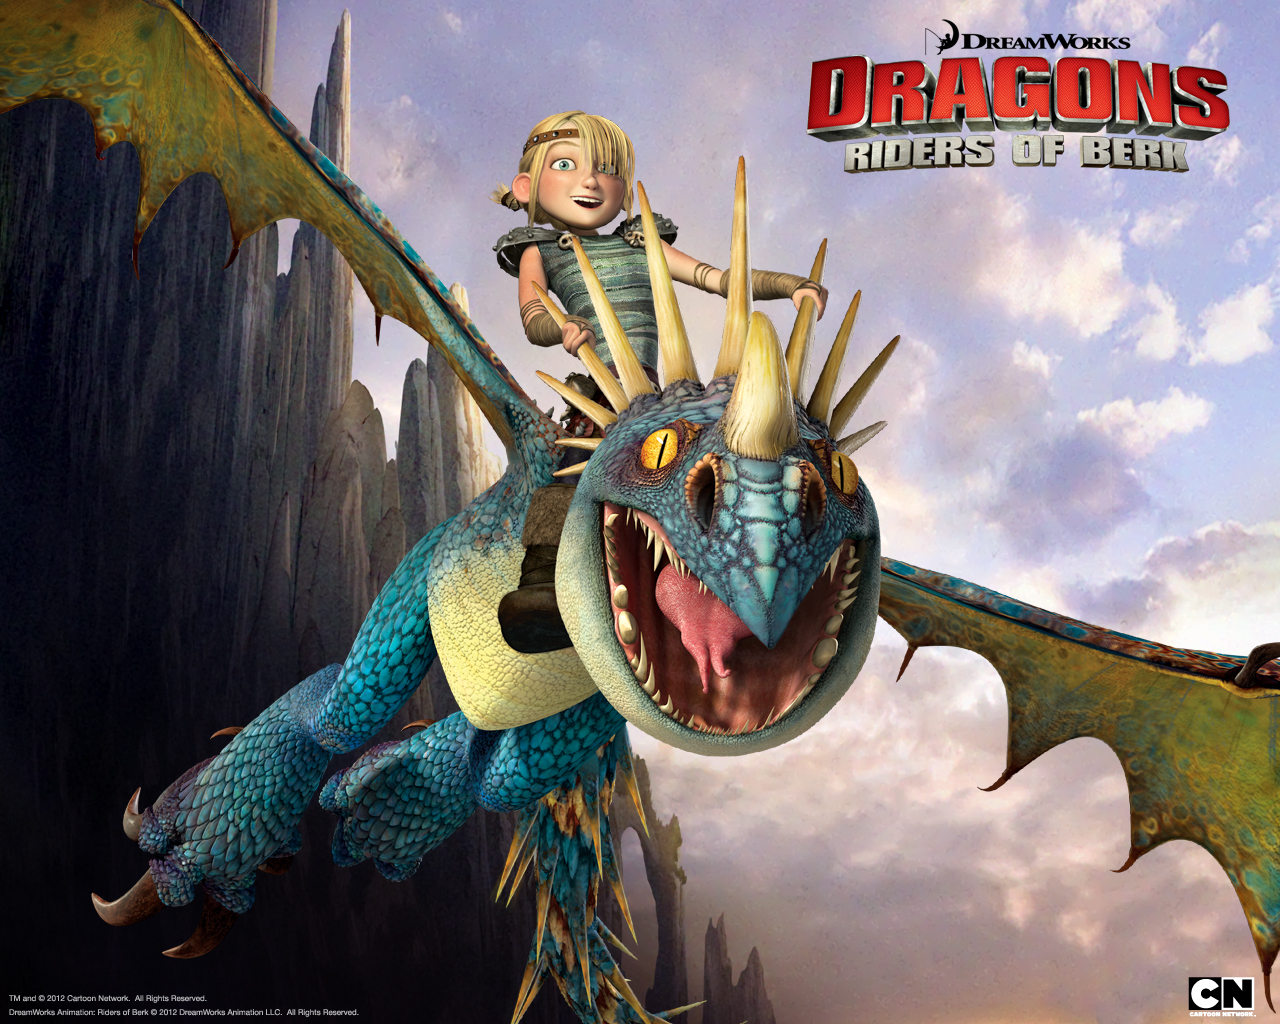 Astrid Riding Stormfly The Dragon From Dreamworks Riders Of Berk